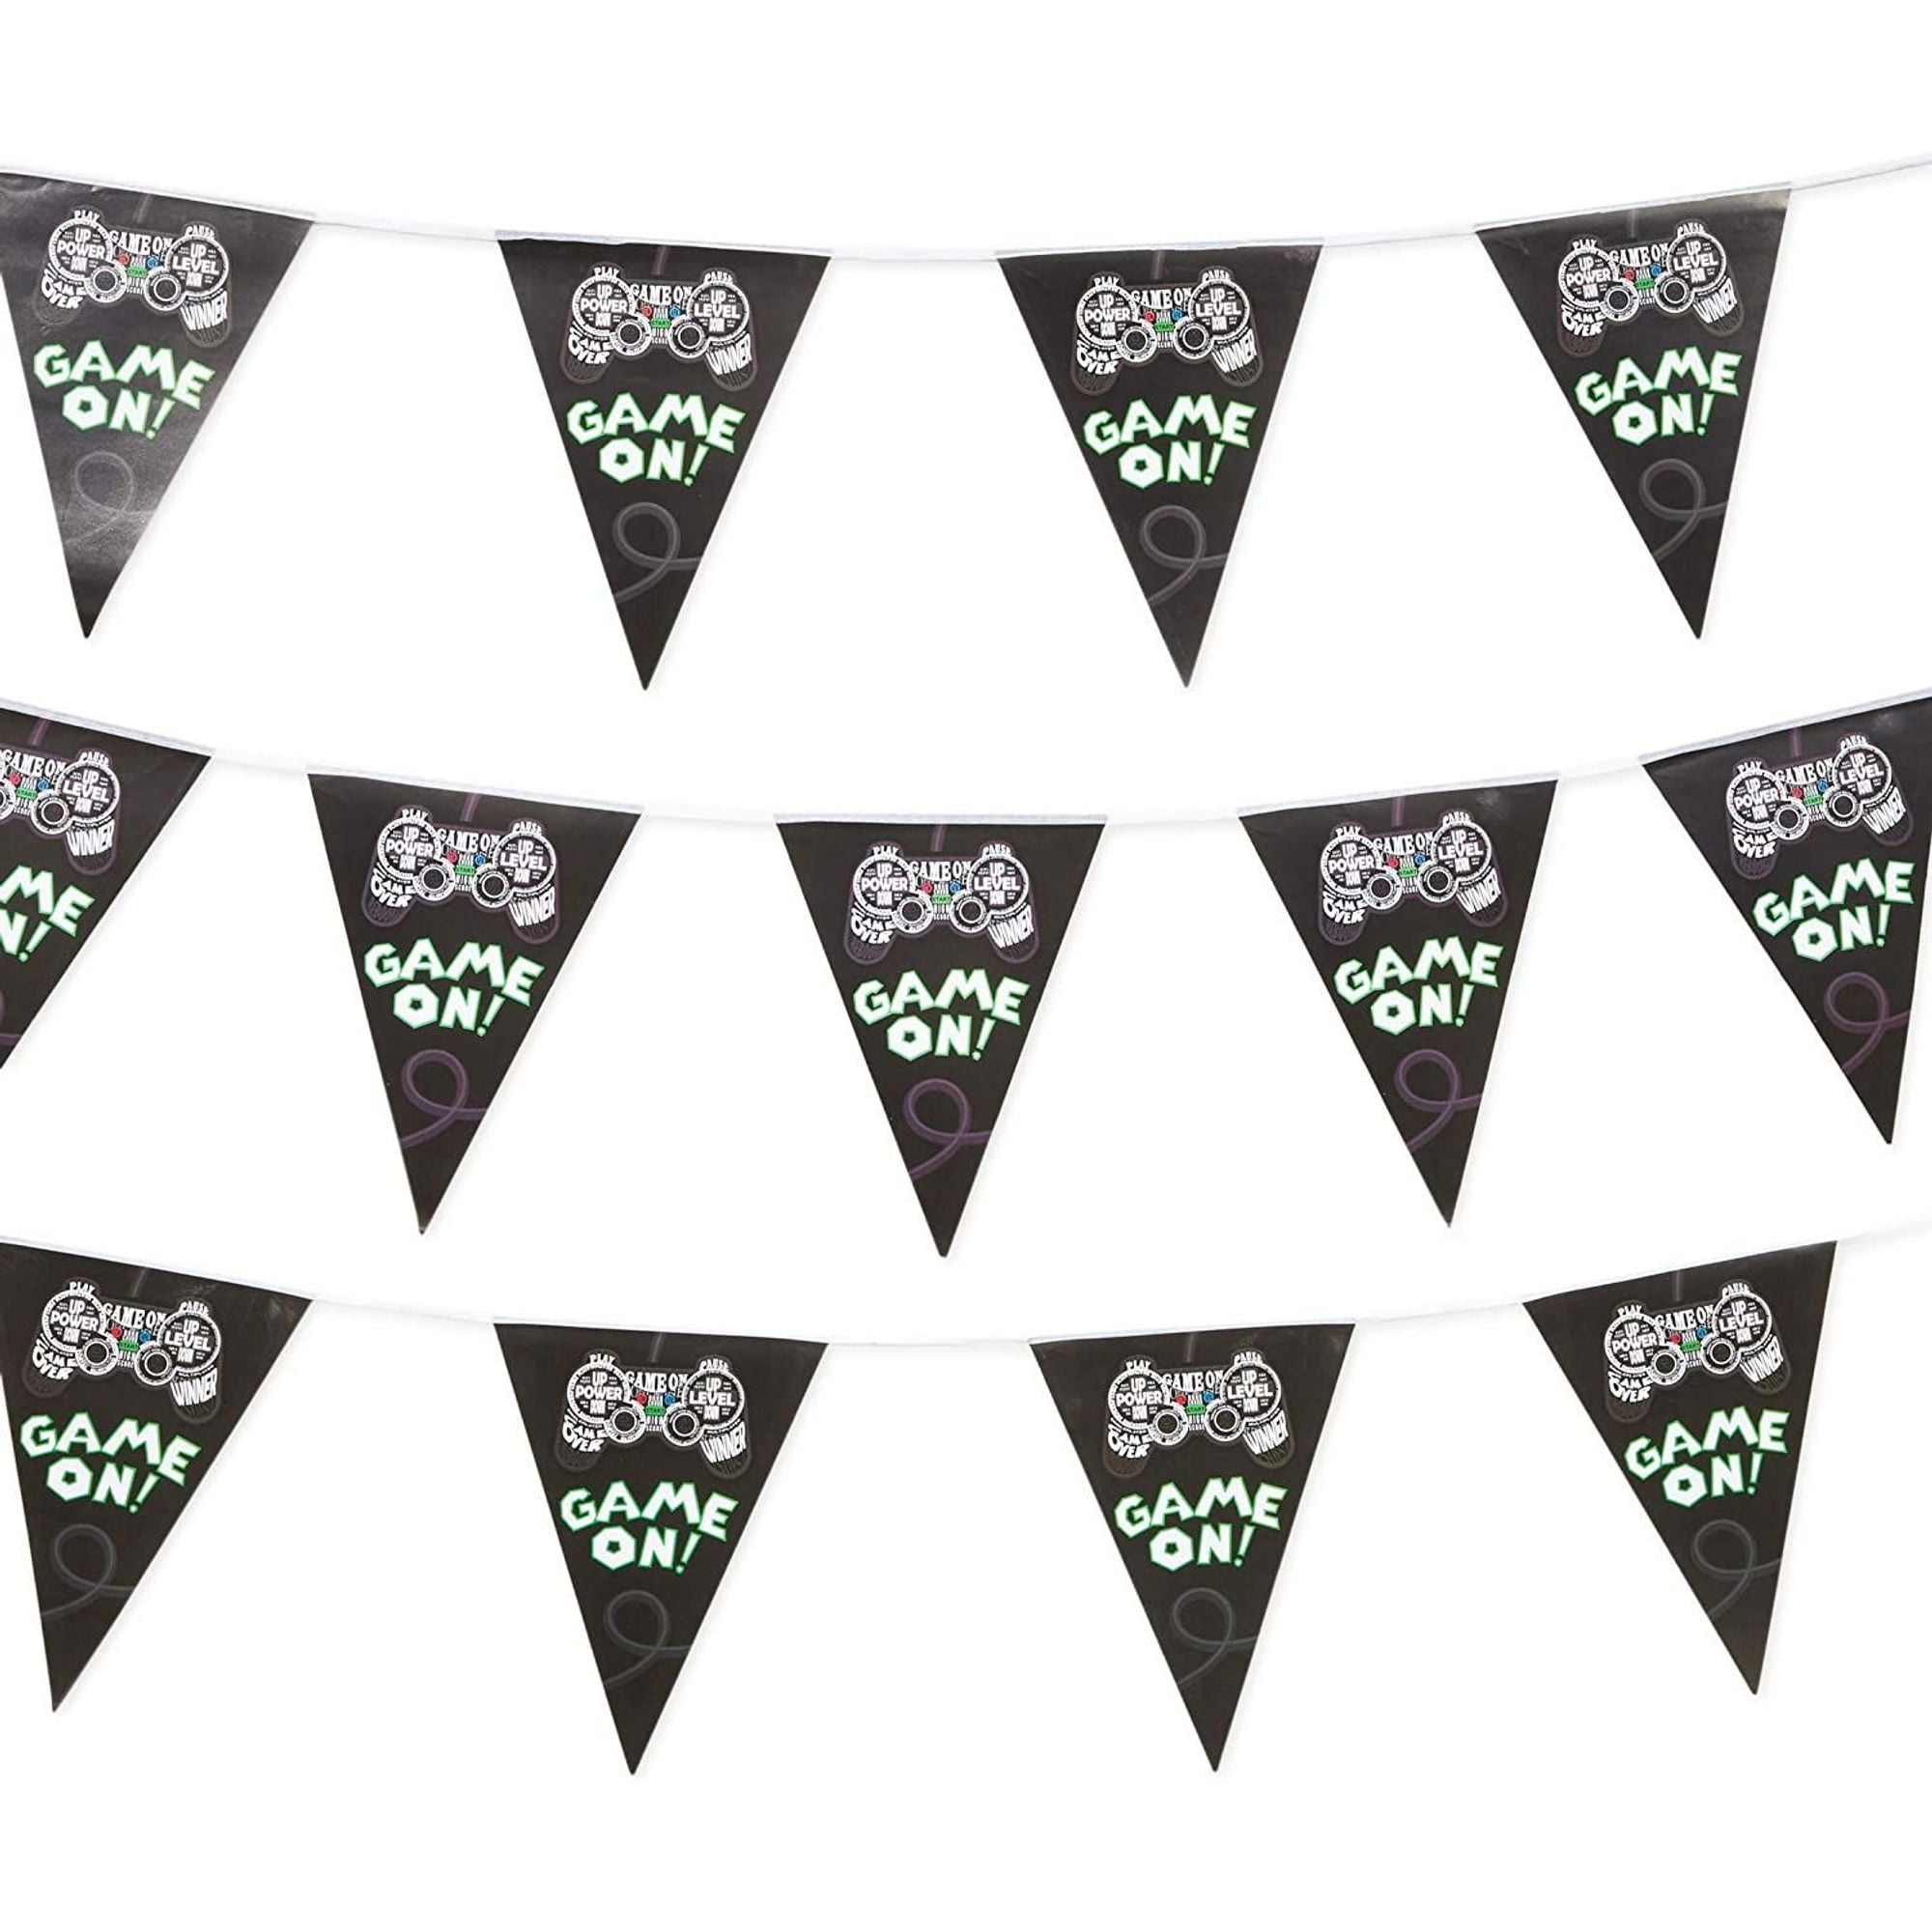 Black and White Football 6 Metre Bunting Flags Party Decoration Celebration 